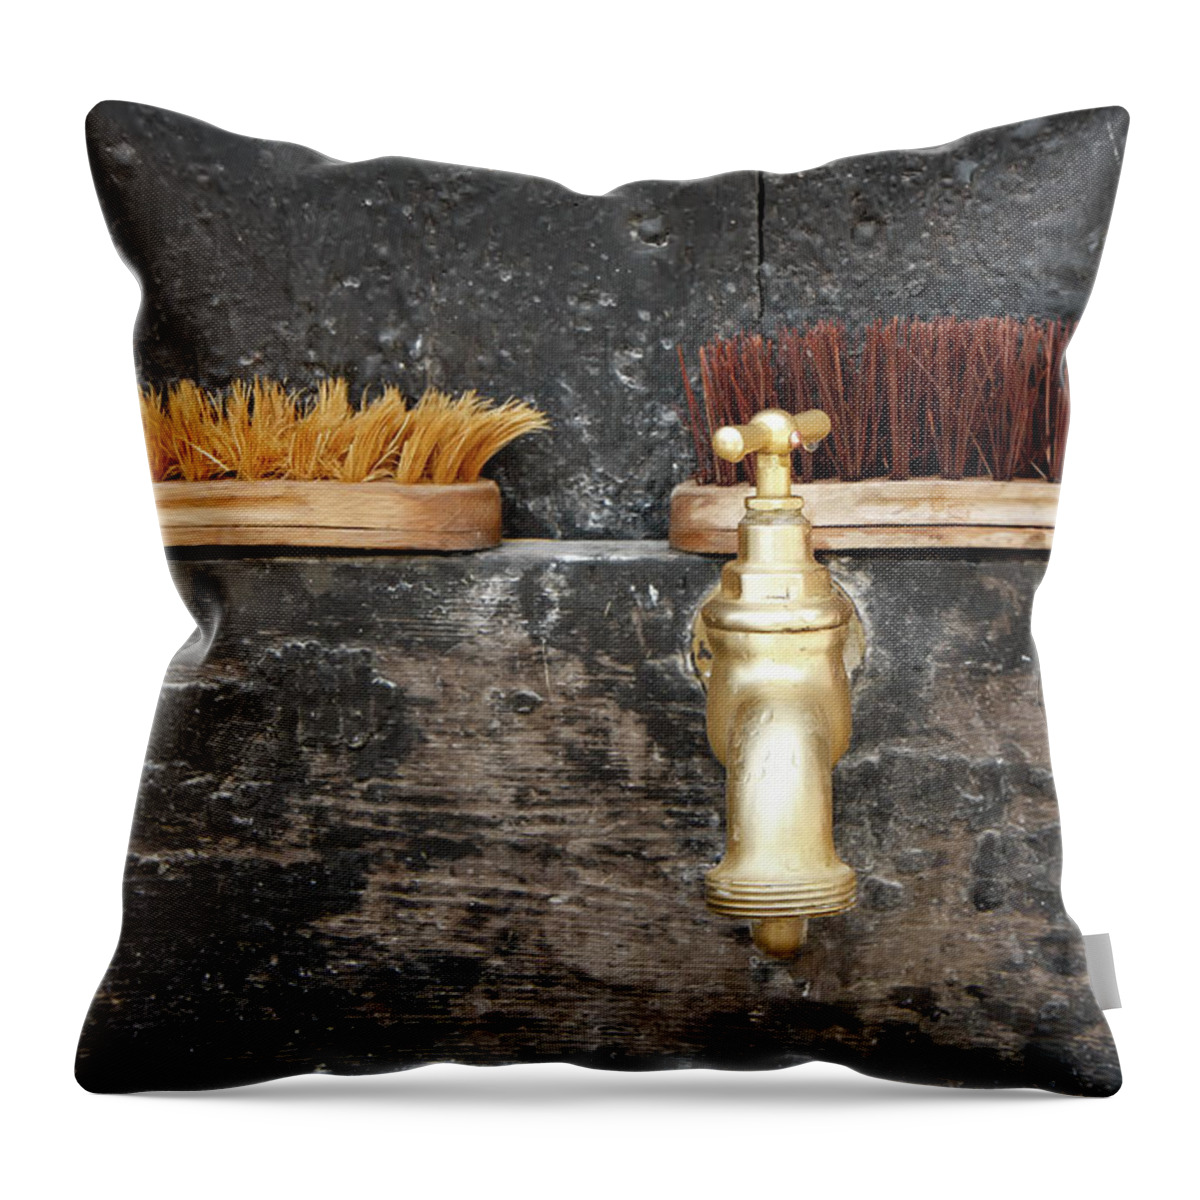 Kg Throw Pillow featuring the photograph Zuiderzee Brushes by KG Thienemann